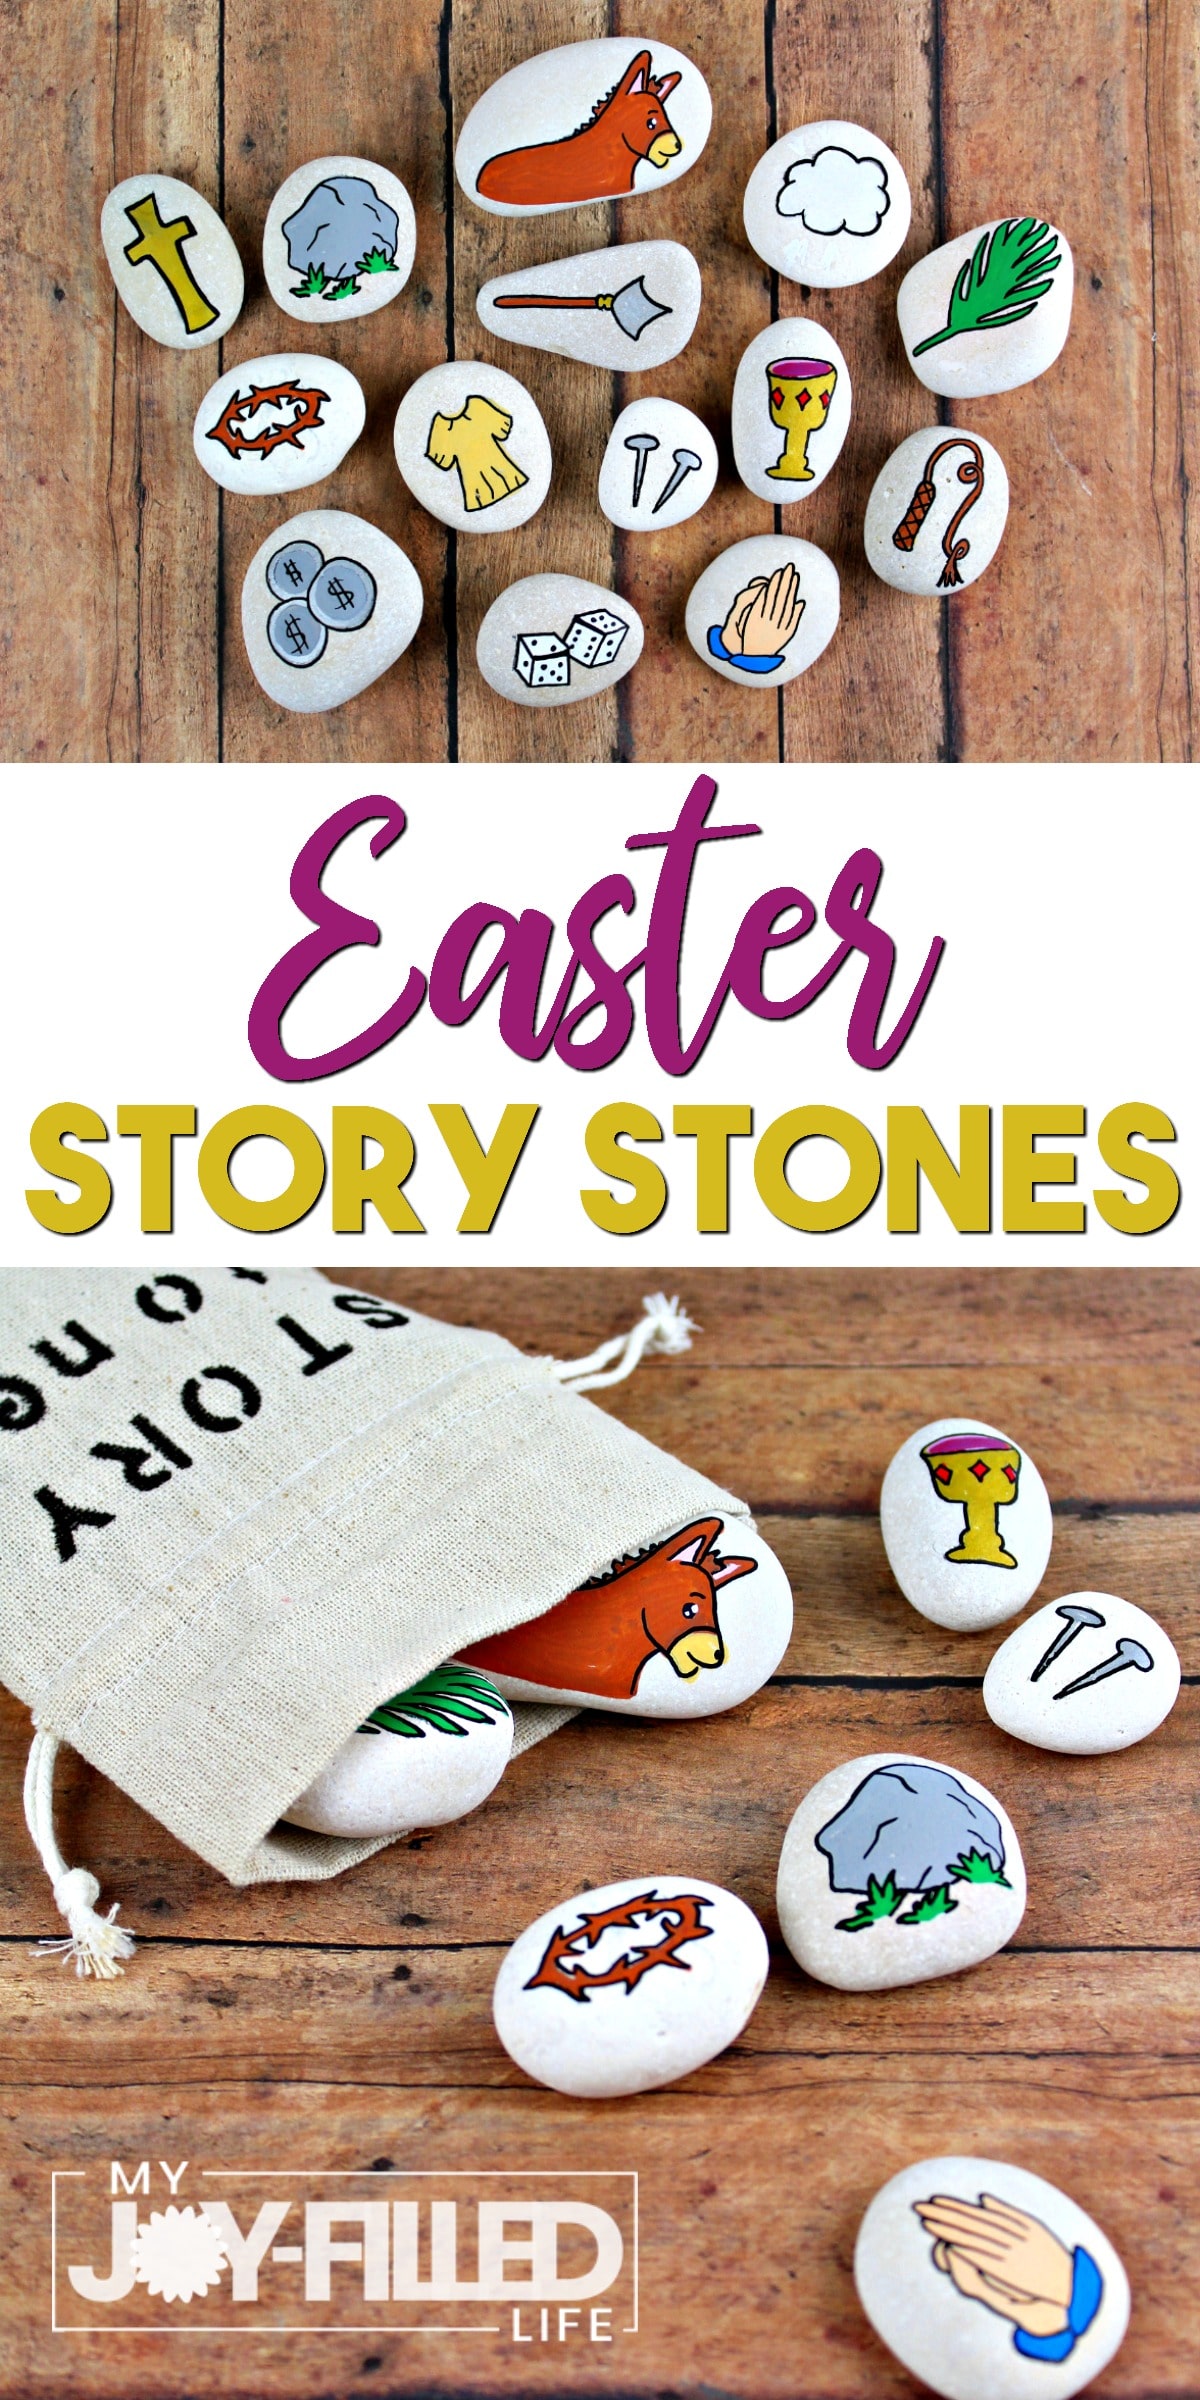 Easter story stones help to keep Christ at the center of Easter - use them as story props or a scavenger hunt, or even as a gift. #Easter #storystones #heisrisen